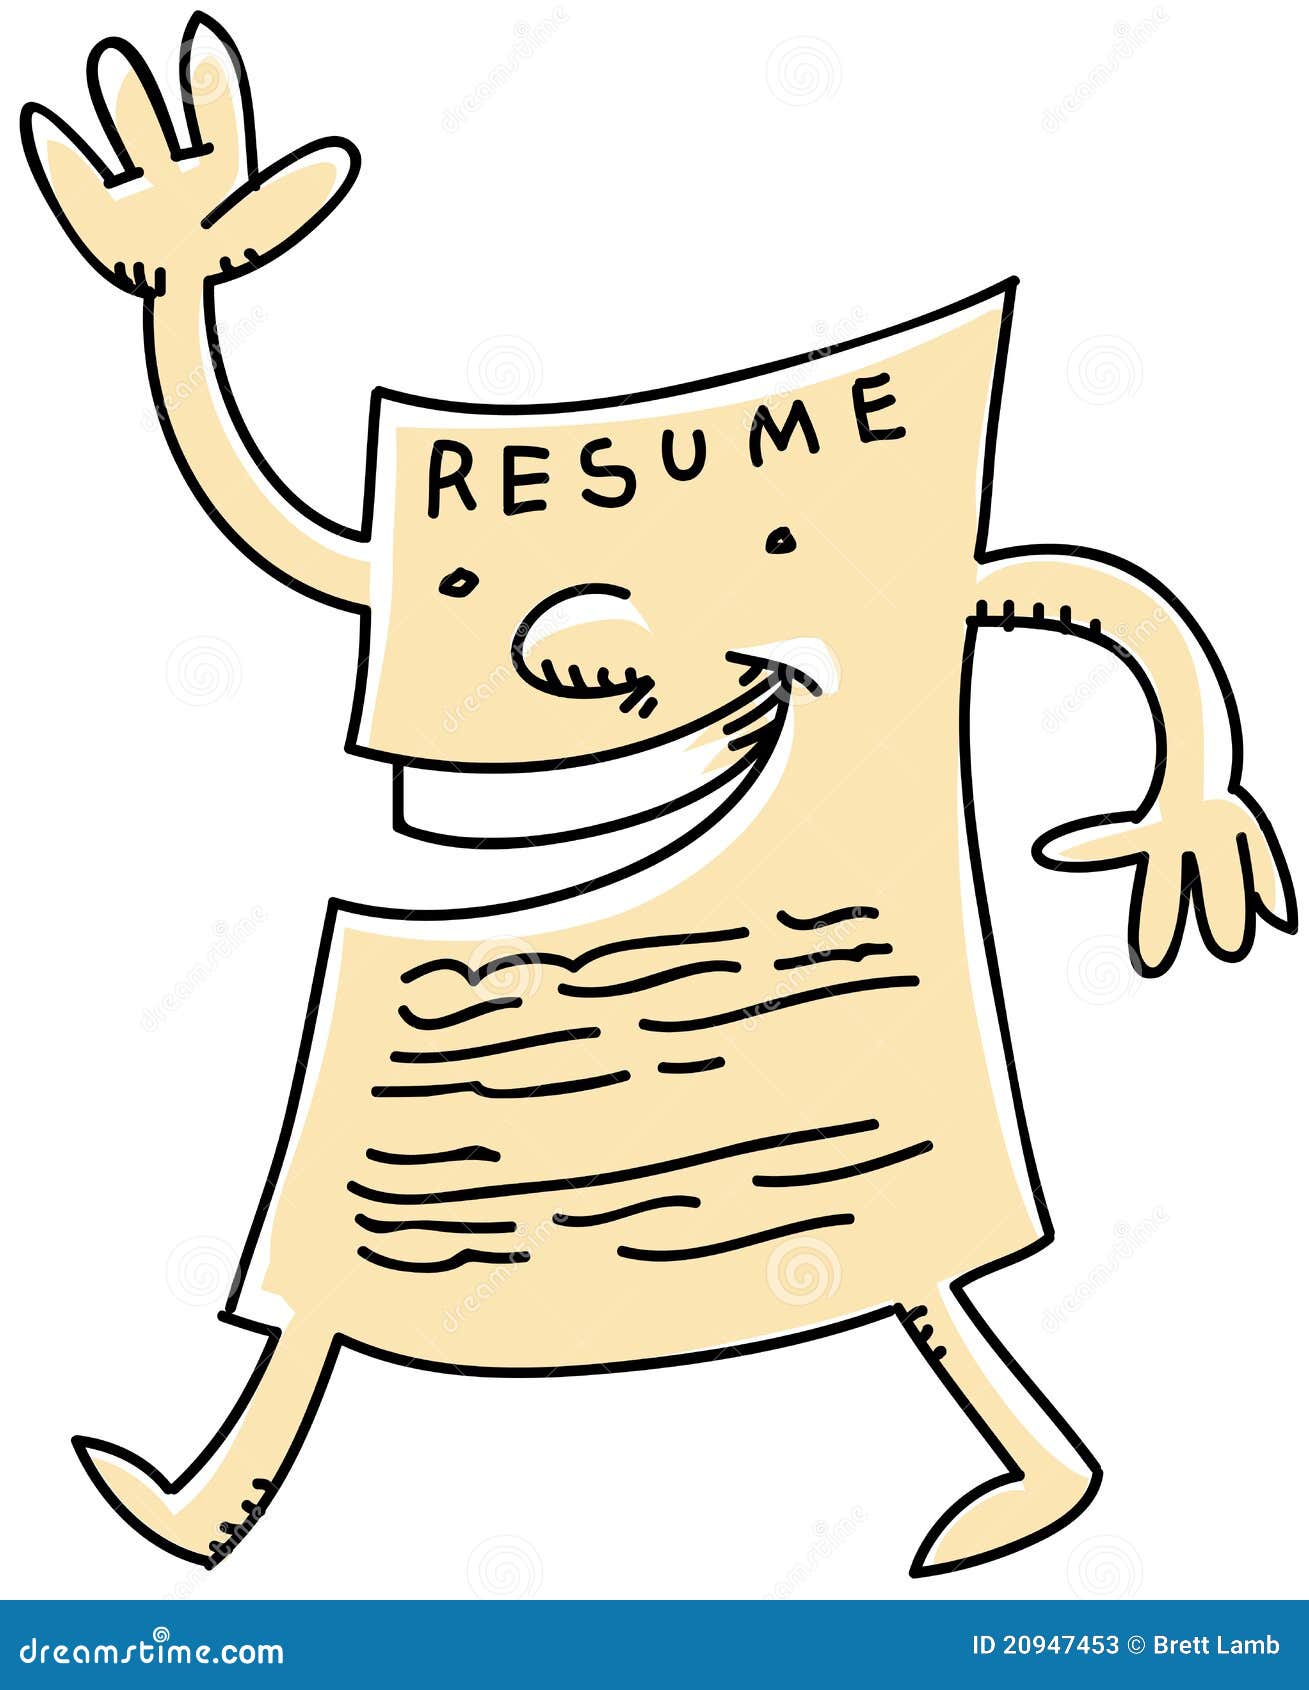 clipart on resume - photo #22